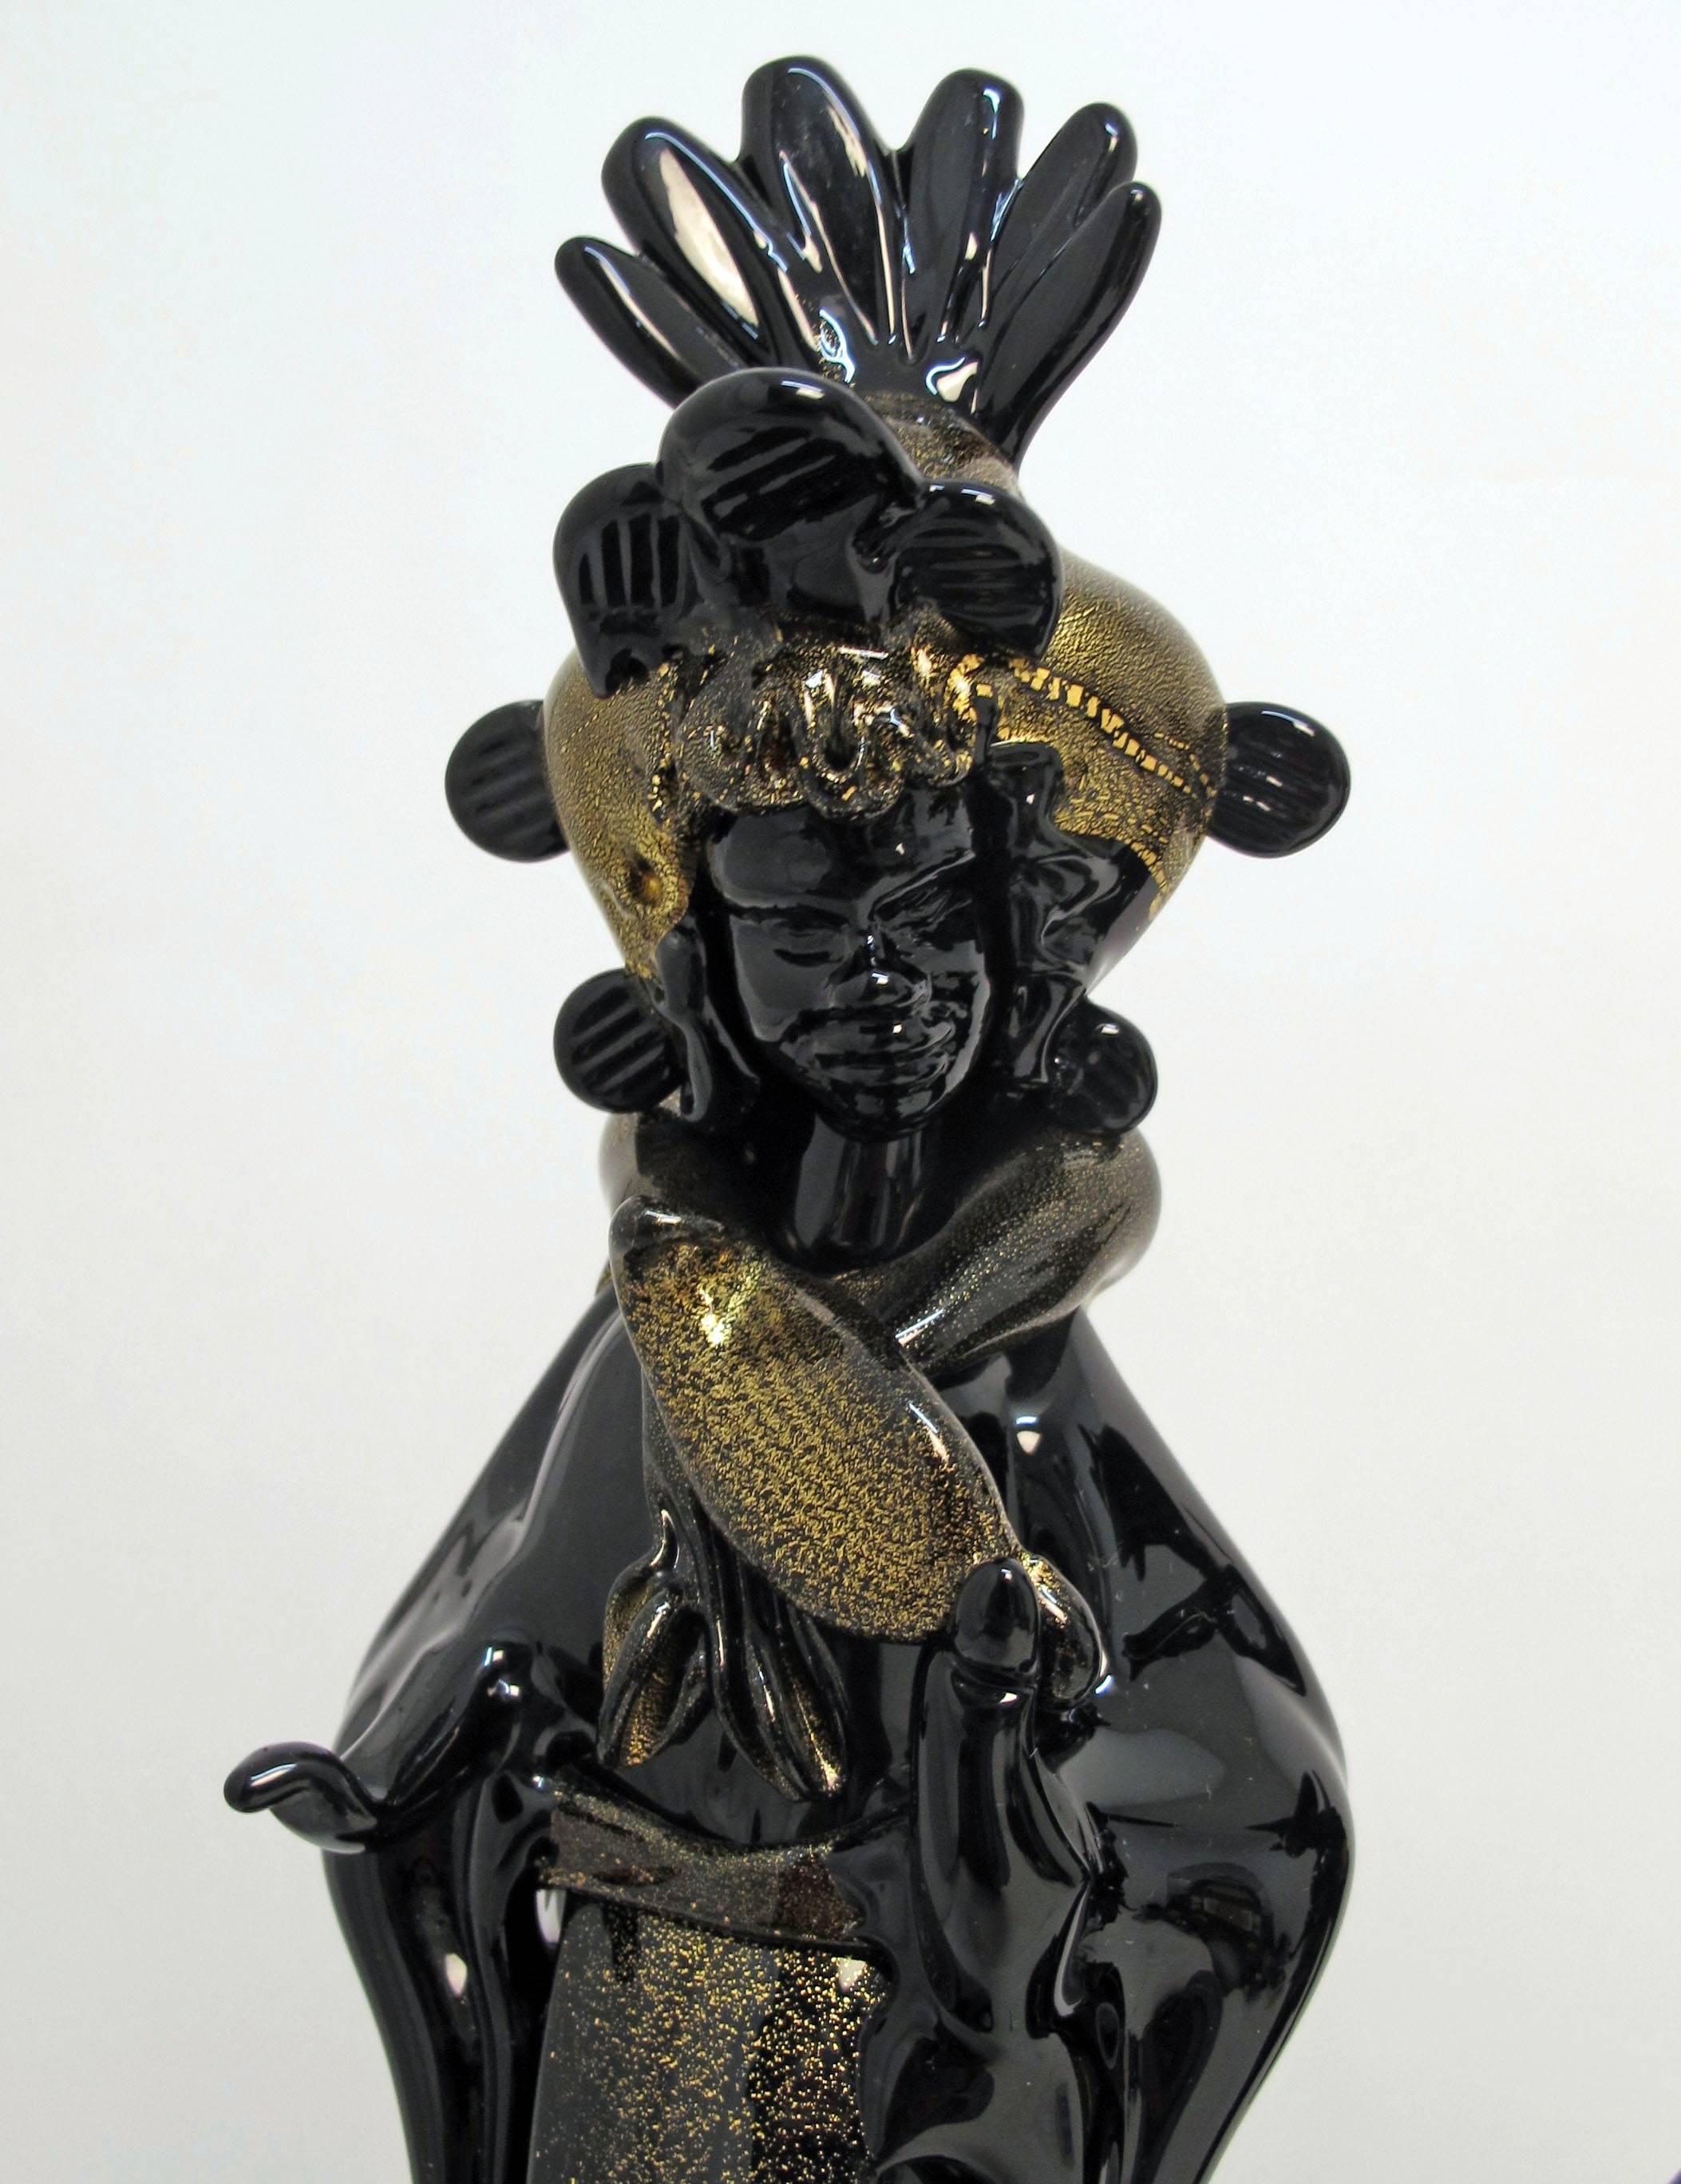 A fine pair of Moorish Figures in Venetian Dress.  Hand blown Black Murano Glass with Gold accenting by Barovier, Italy, 1930s.